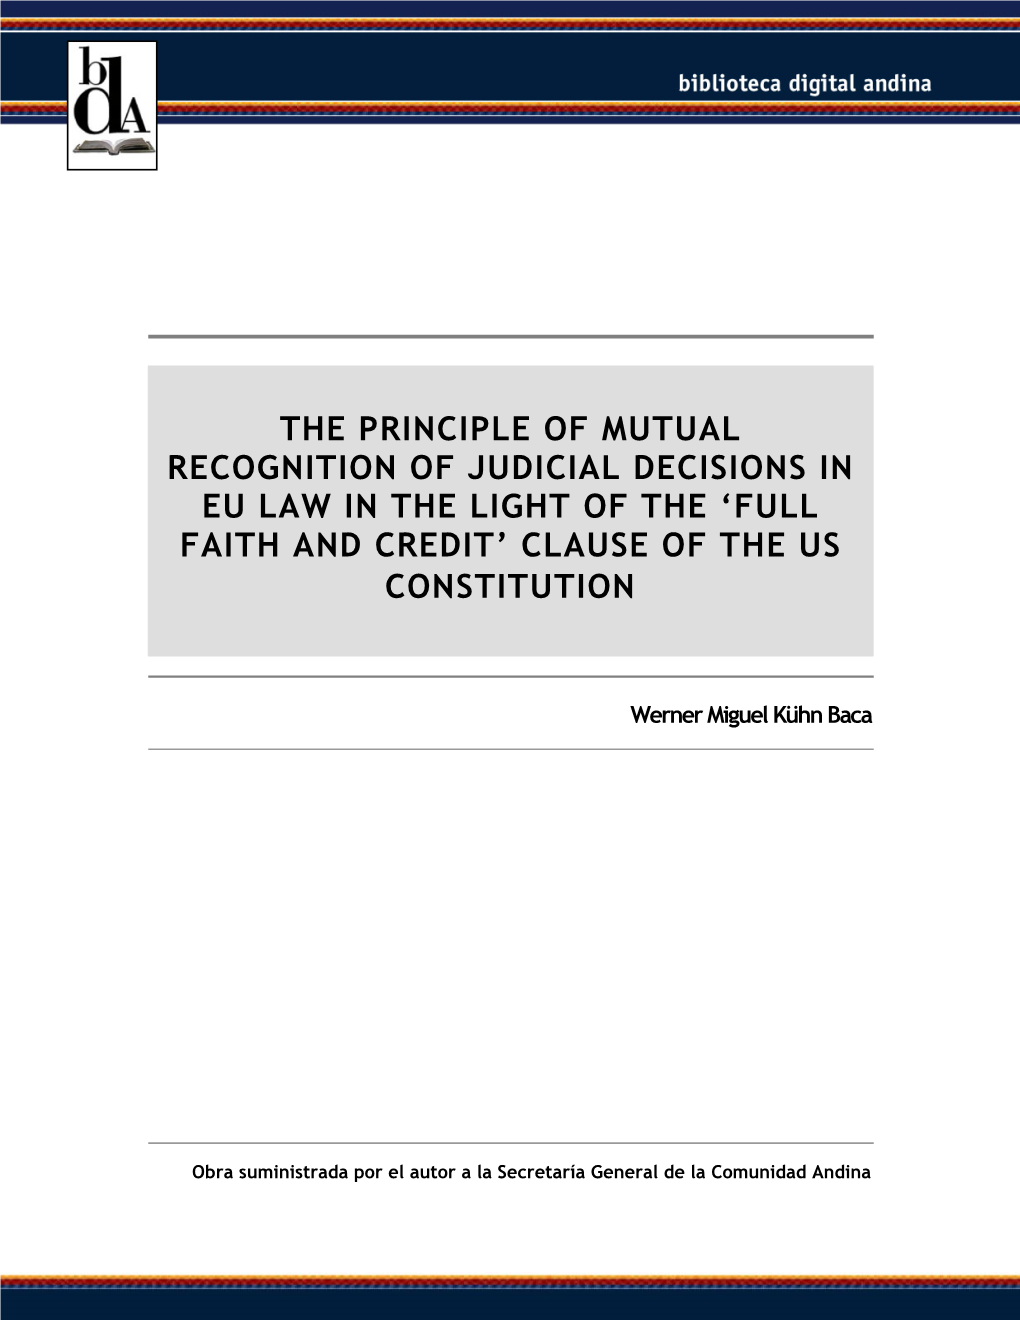 The Principle of Mutual Recognition of Judicial Decisions in Eu Law in the Light of the ‘Full Faith and Credit’ Clause of the Us Constitution